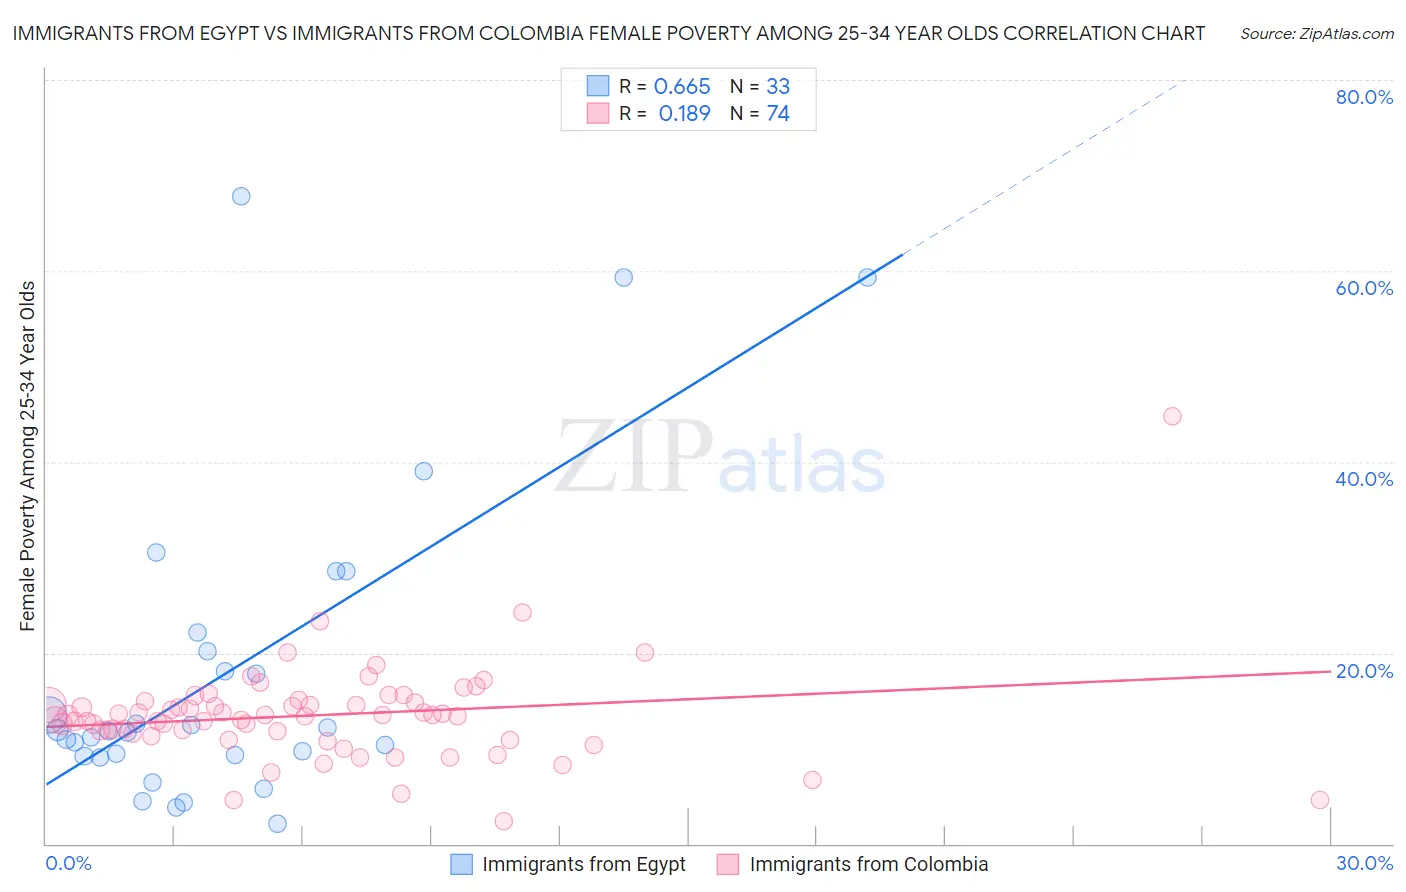 Immigrants from Egypt vs Immigrants from Colombia Female Poverty Among 25-34 Year Olds